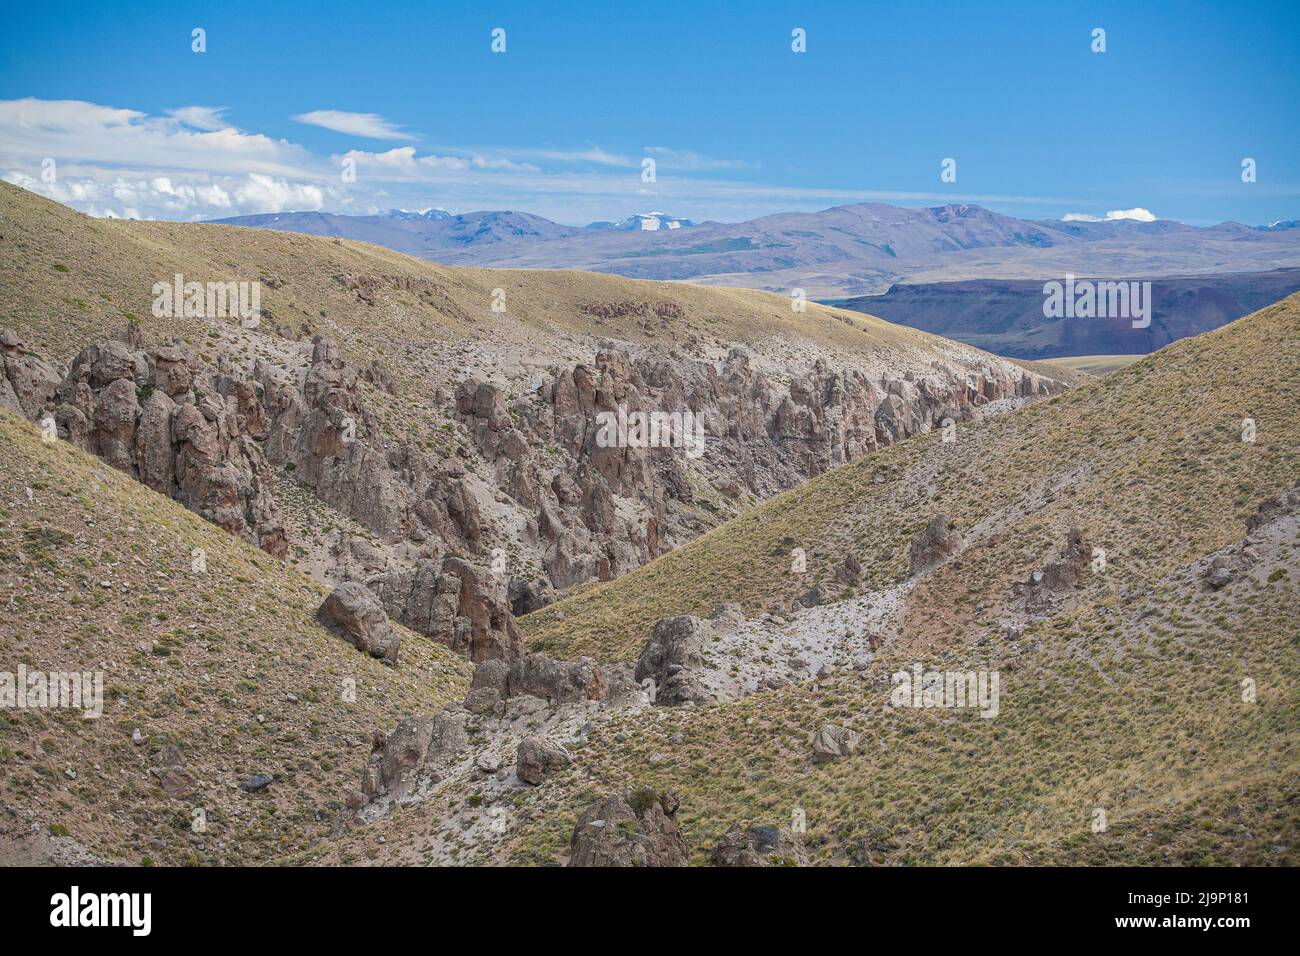 The Los Tachos Trail on the western slopes of the Domuyo volcanic complex in Argentina Stock Photo